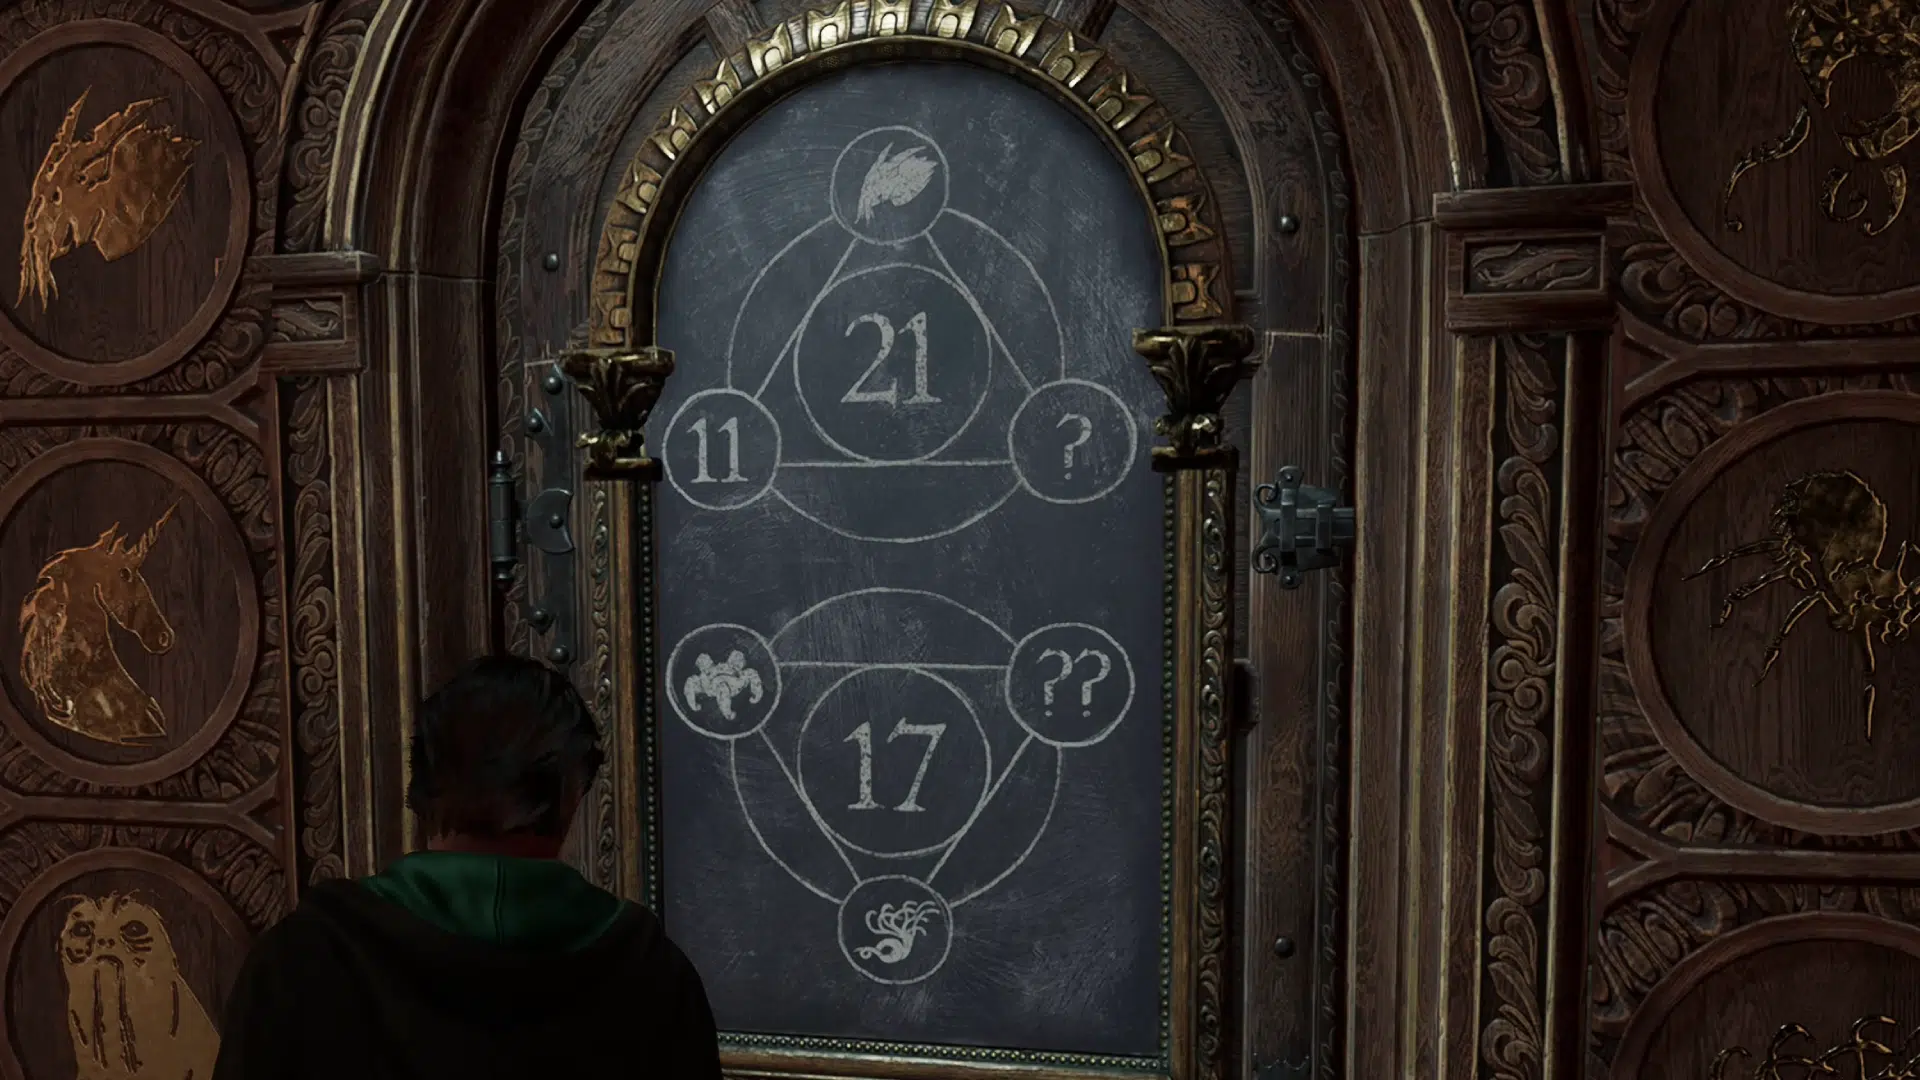 How to solve Arithmancy door puzzles in Hogwarts Legacy - Polygon